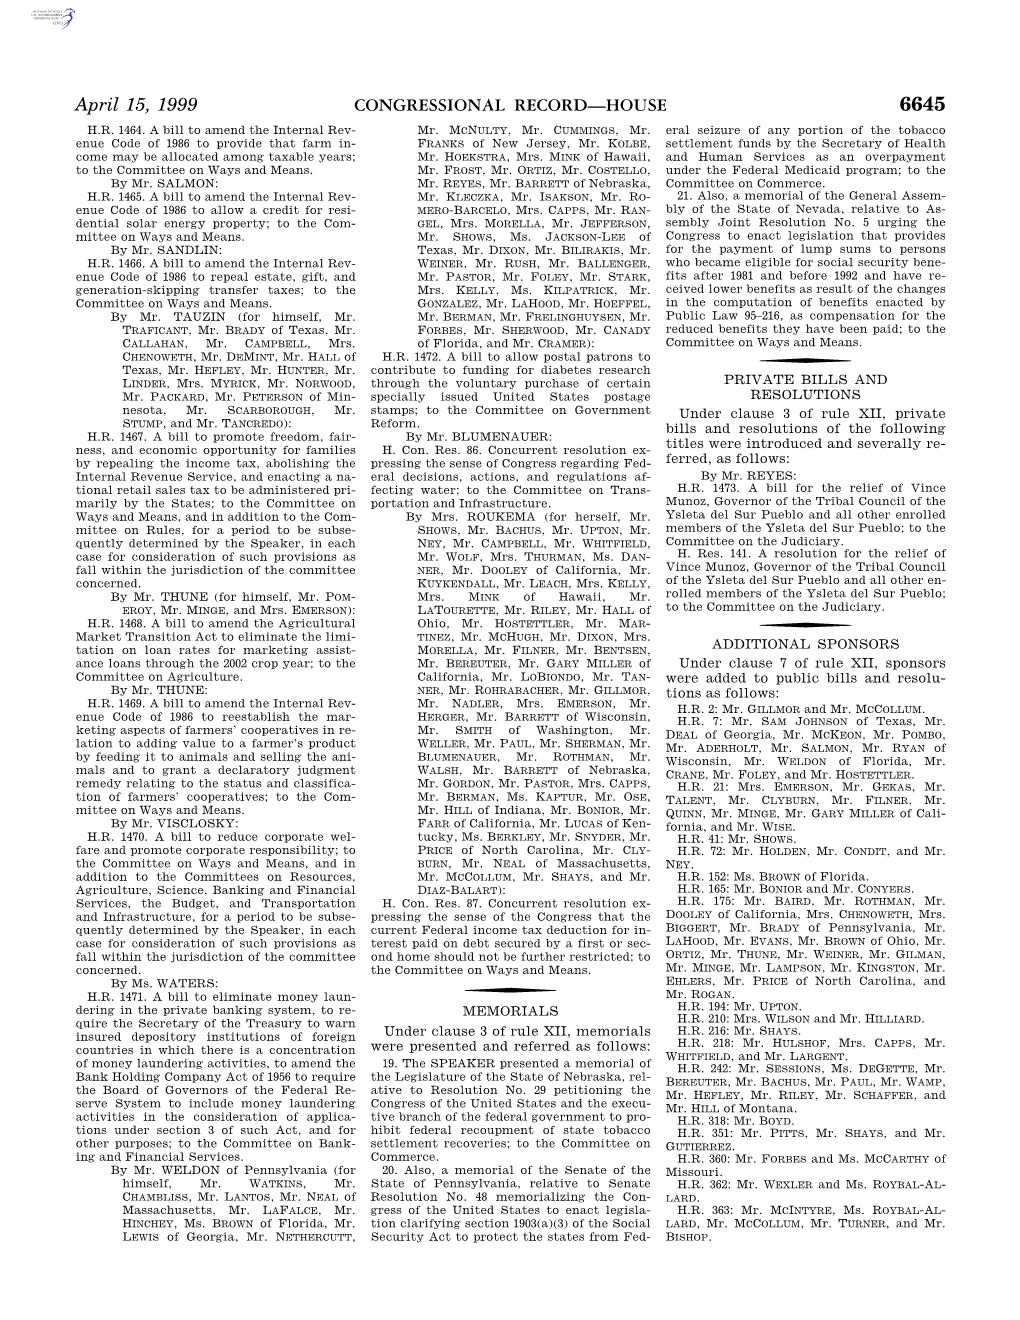 CONGRESSIONAL RECORD—HOUSE April 15, 1999